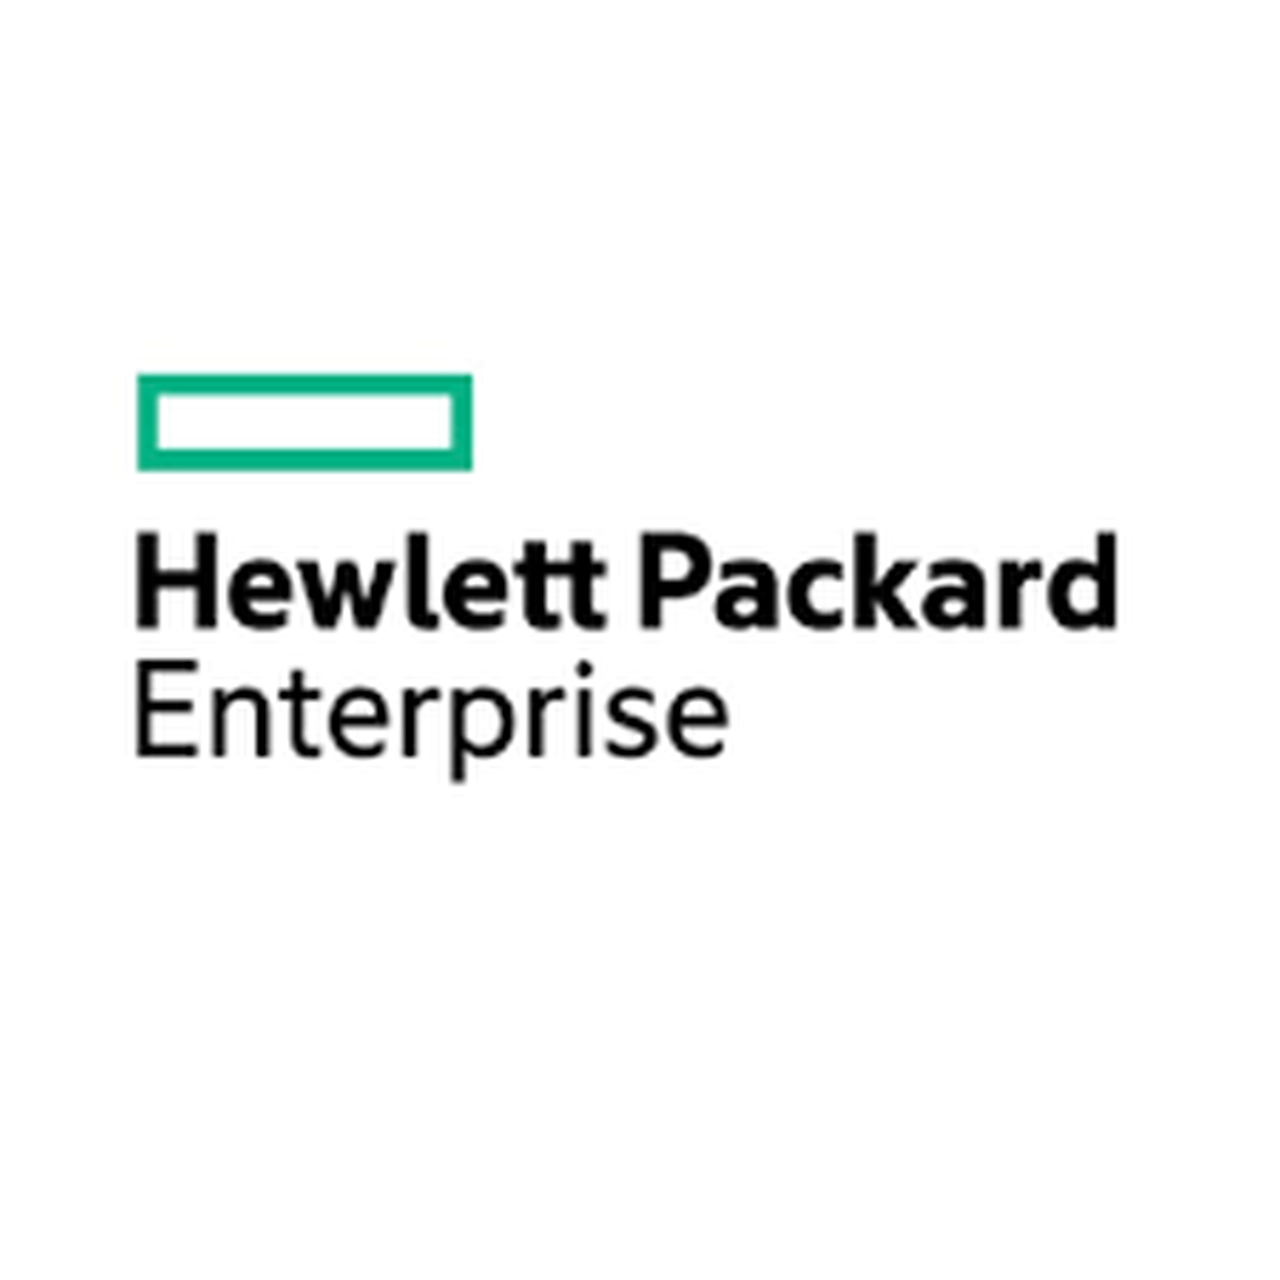 HPE SN6600B 32Gb 48/24PP+ 24pSFP+ Switch Thailand - English localization